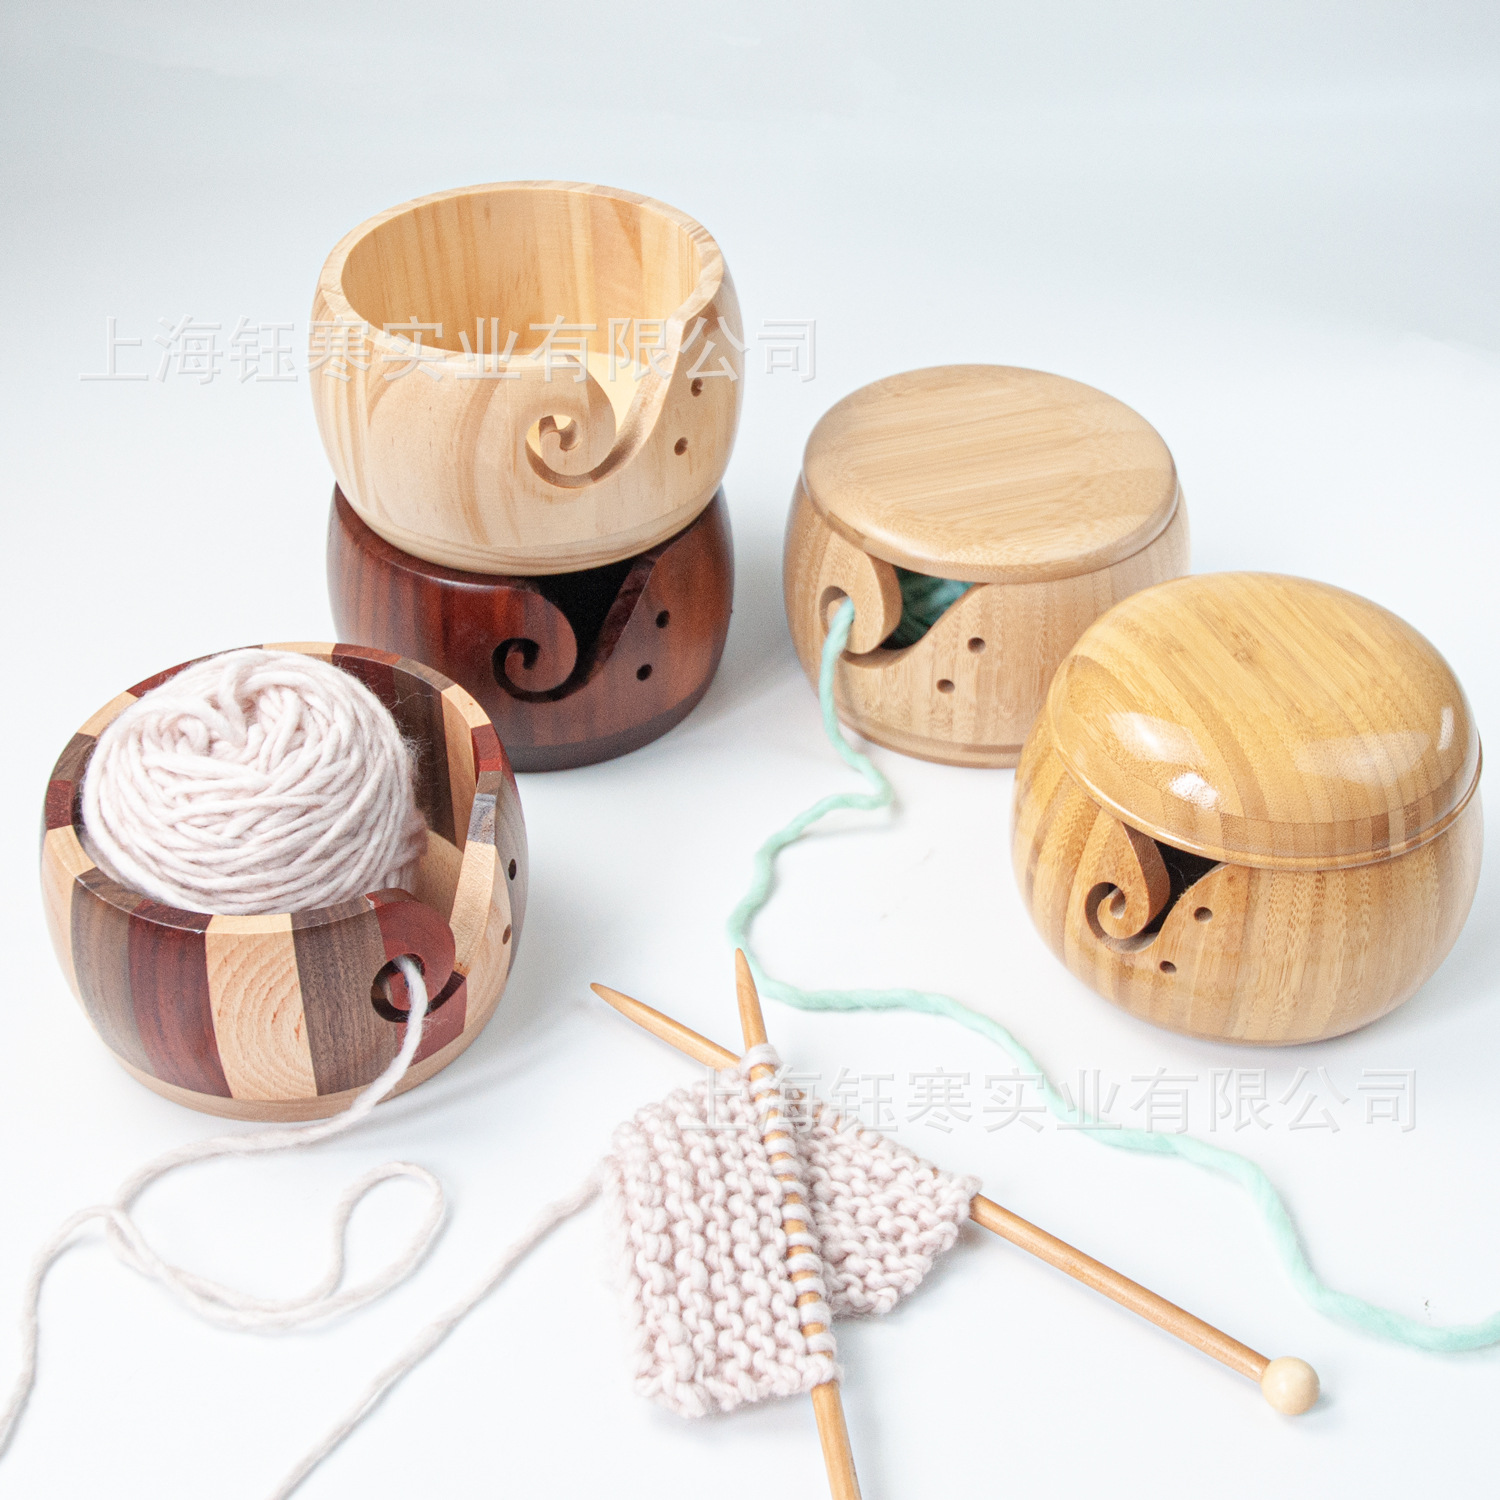   Wooden Wool Bowl Japanese-style Textile Woven Wool Bowl Storage Tool with Holes